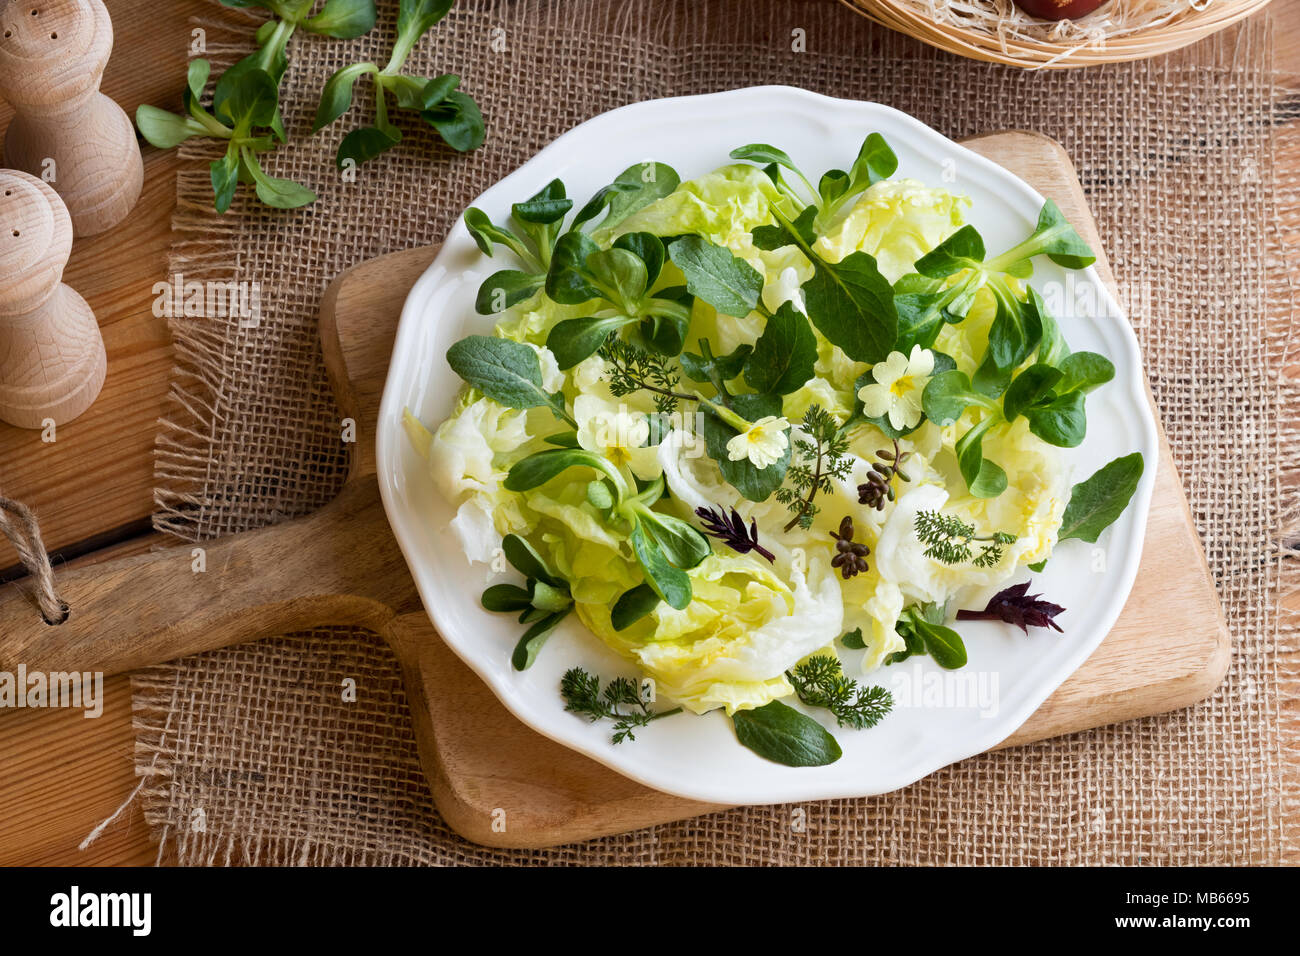 Spring salad with primula blossoms, nipplewort leaves and other wild edible plants Stock Photo